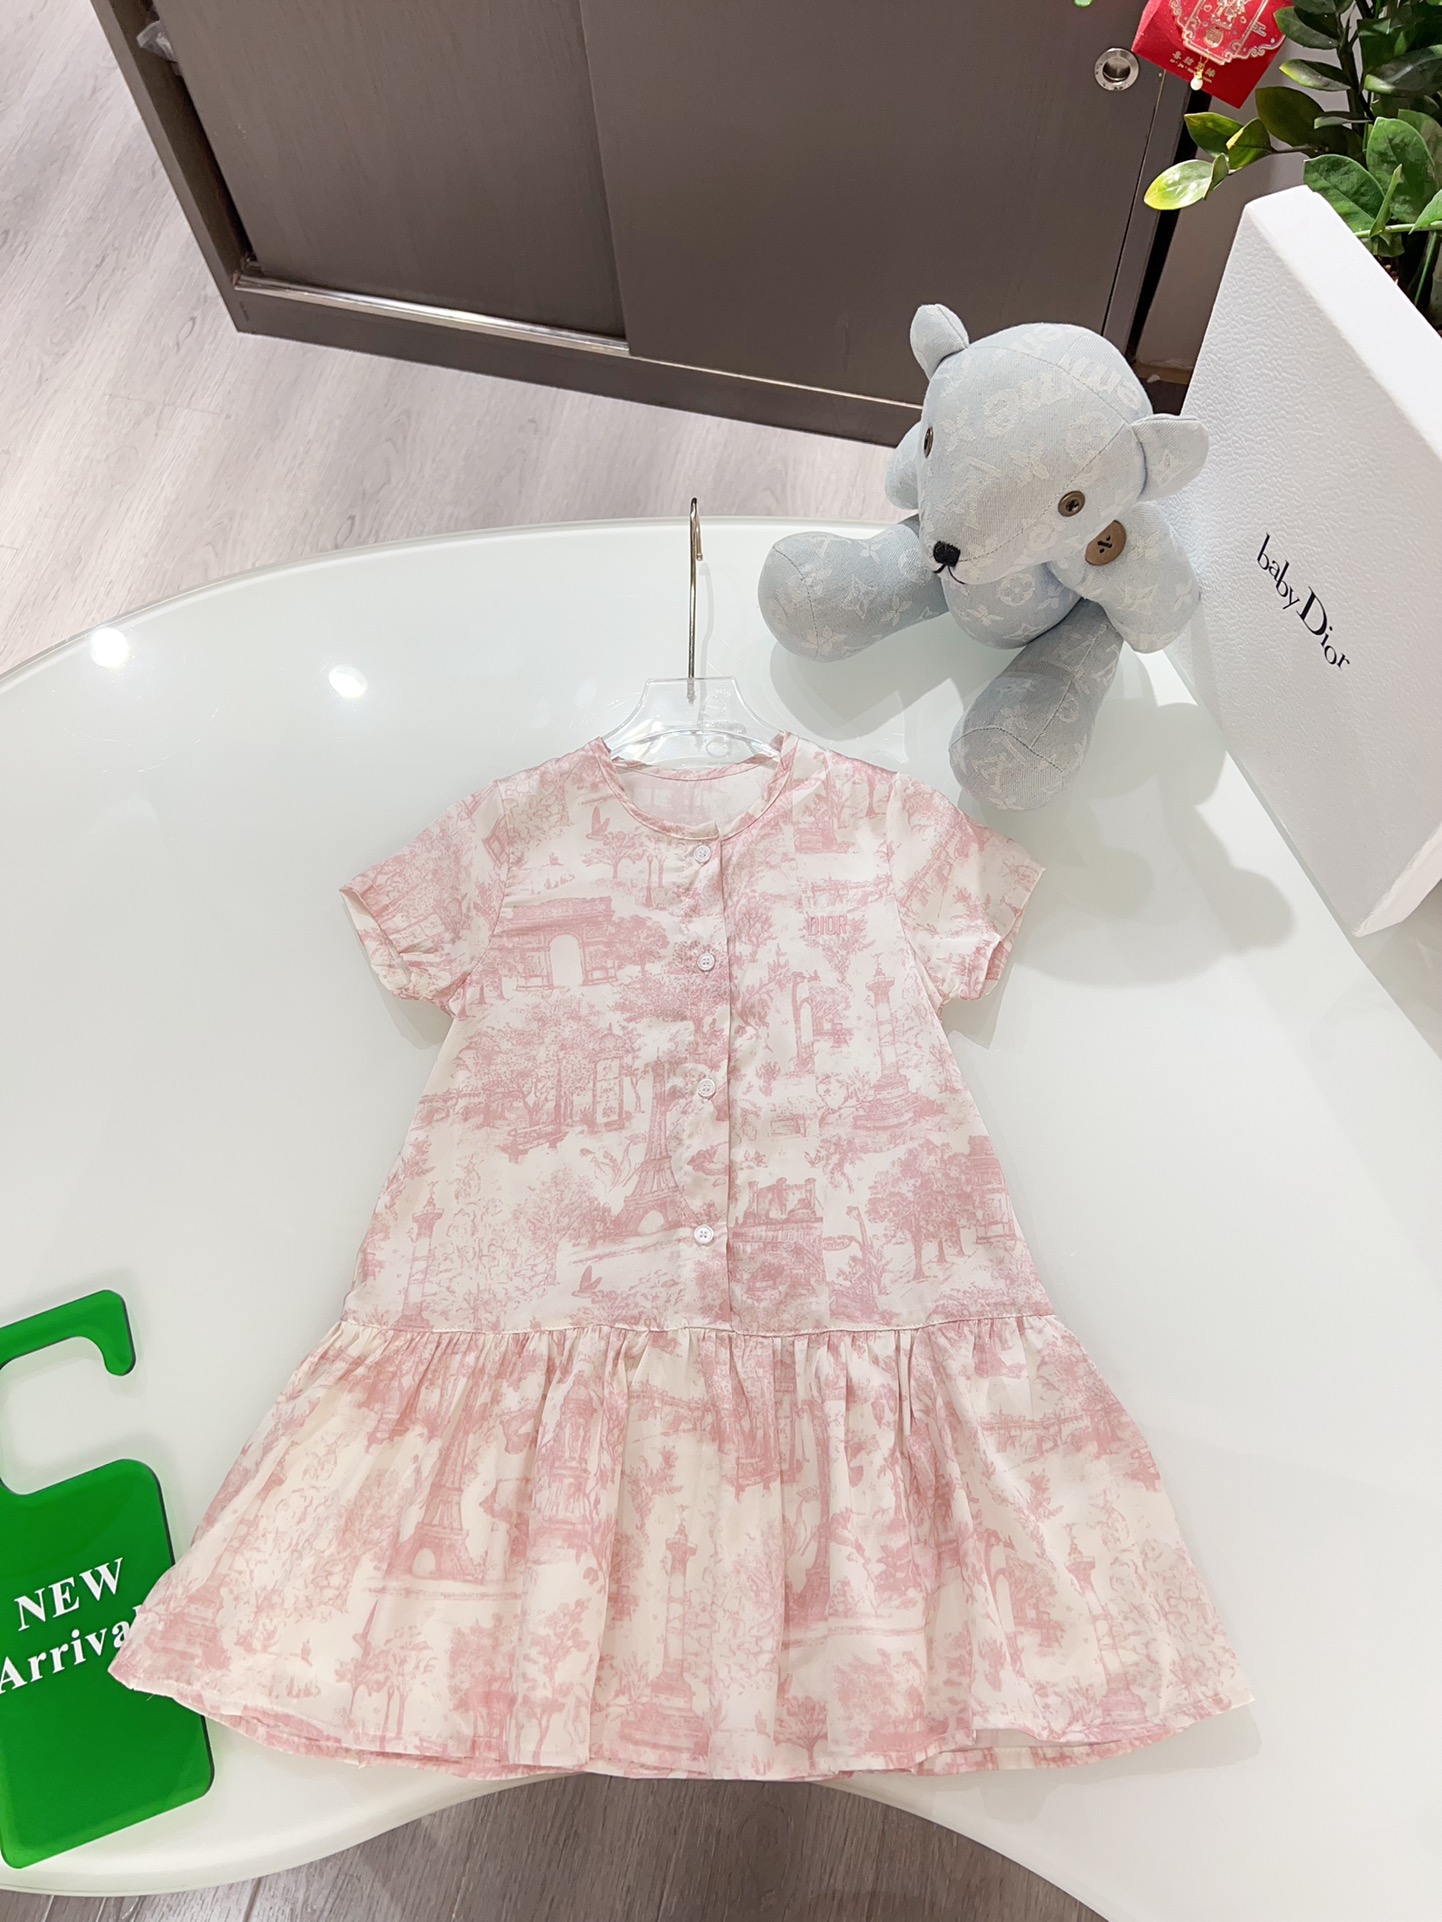 Dior Clothing Dresses Light Pink Embroidery Fashion